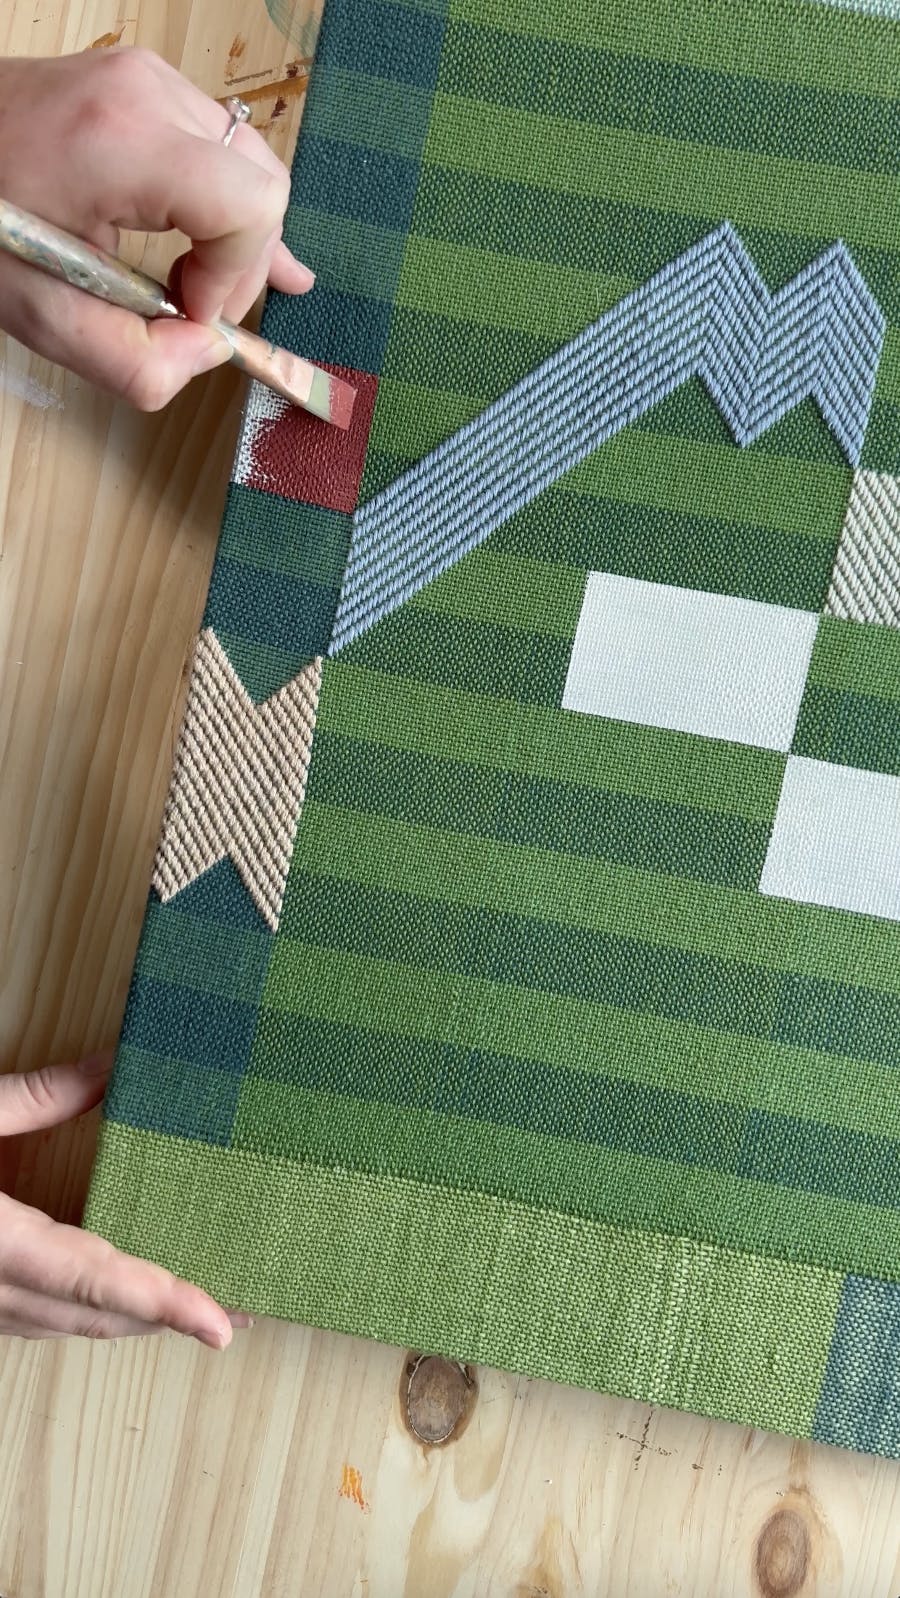 An aerial view of artist Sarah Sullivan Sherod painting a red line on a green striped, handwoven artwork.